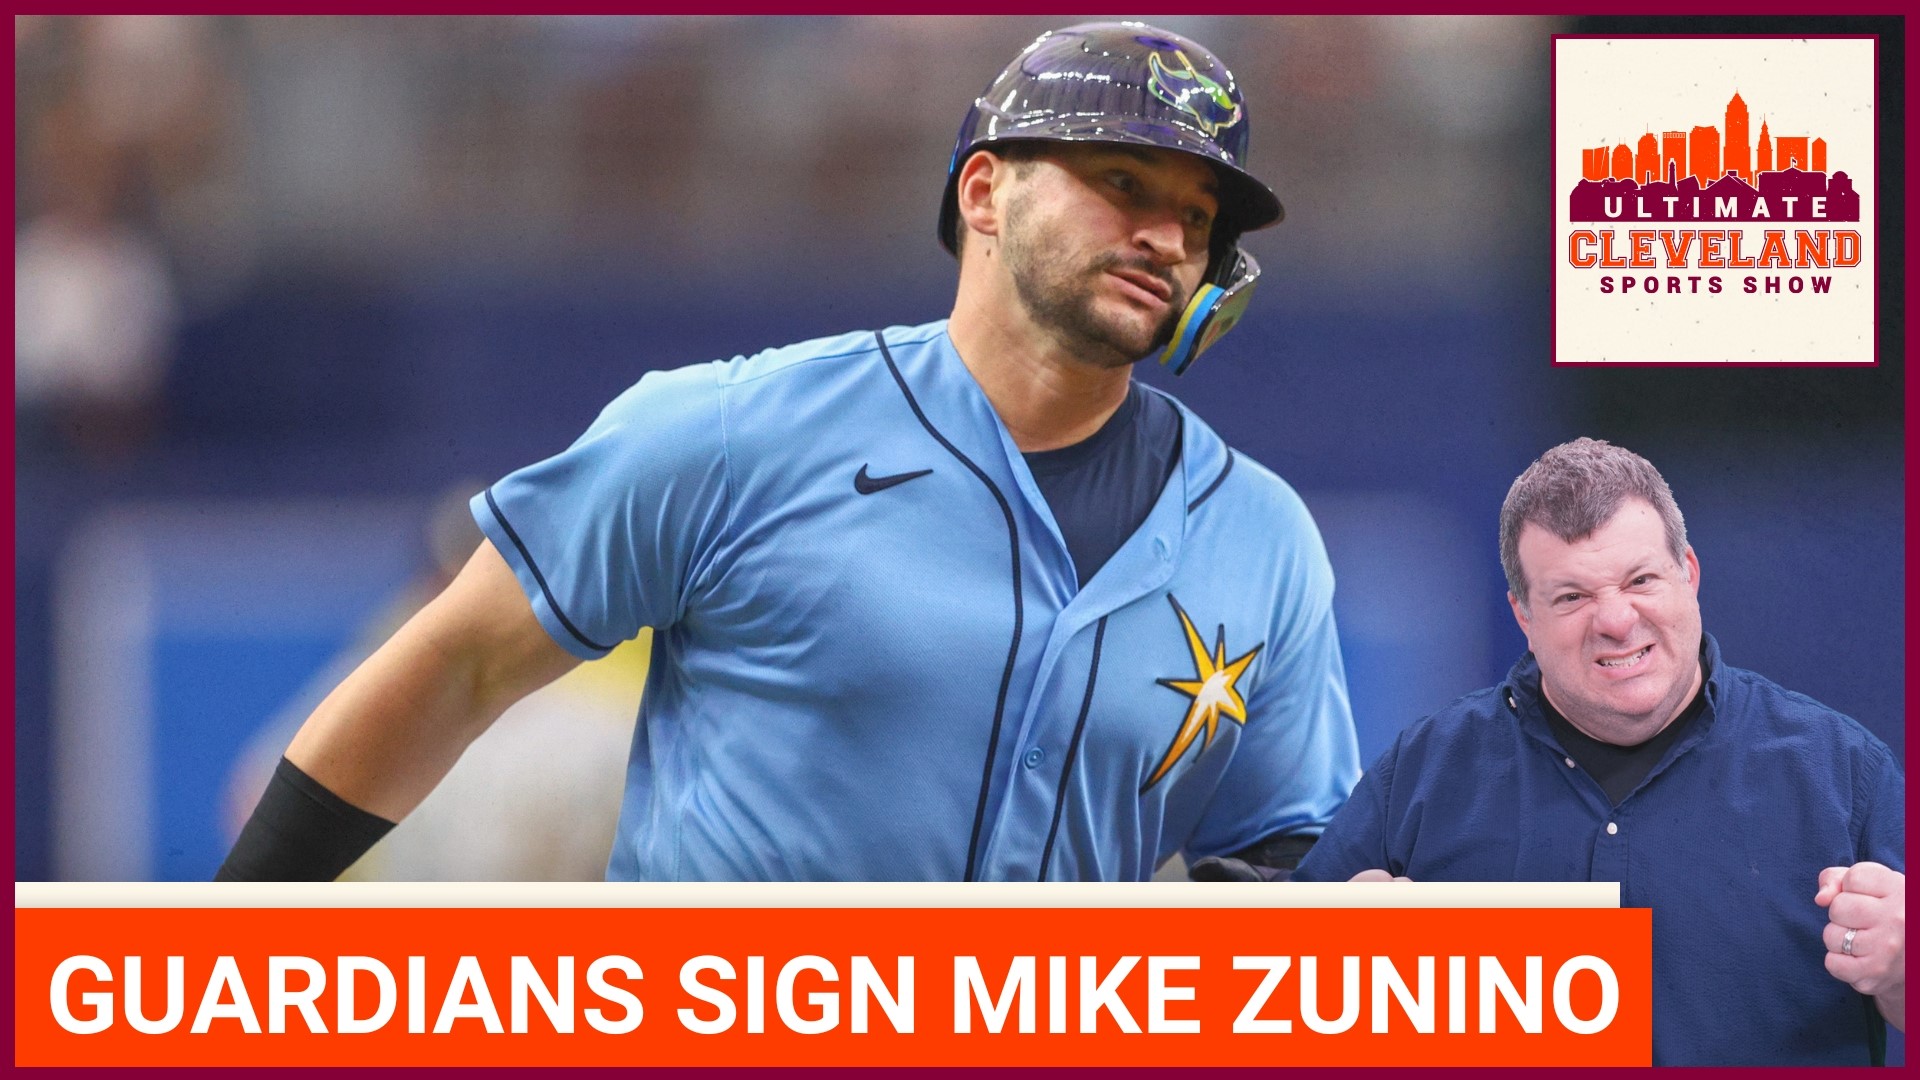 The Cleveland Guardians are signing free-agent catcher Mike Zunino